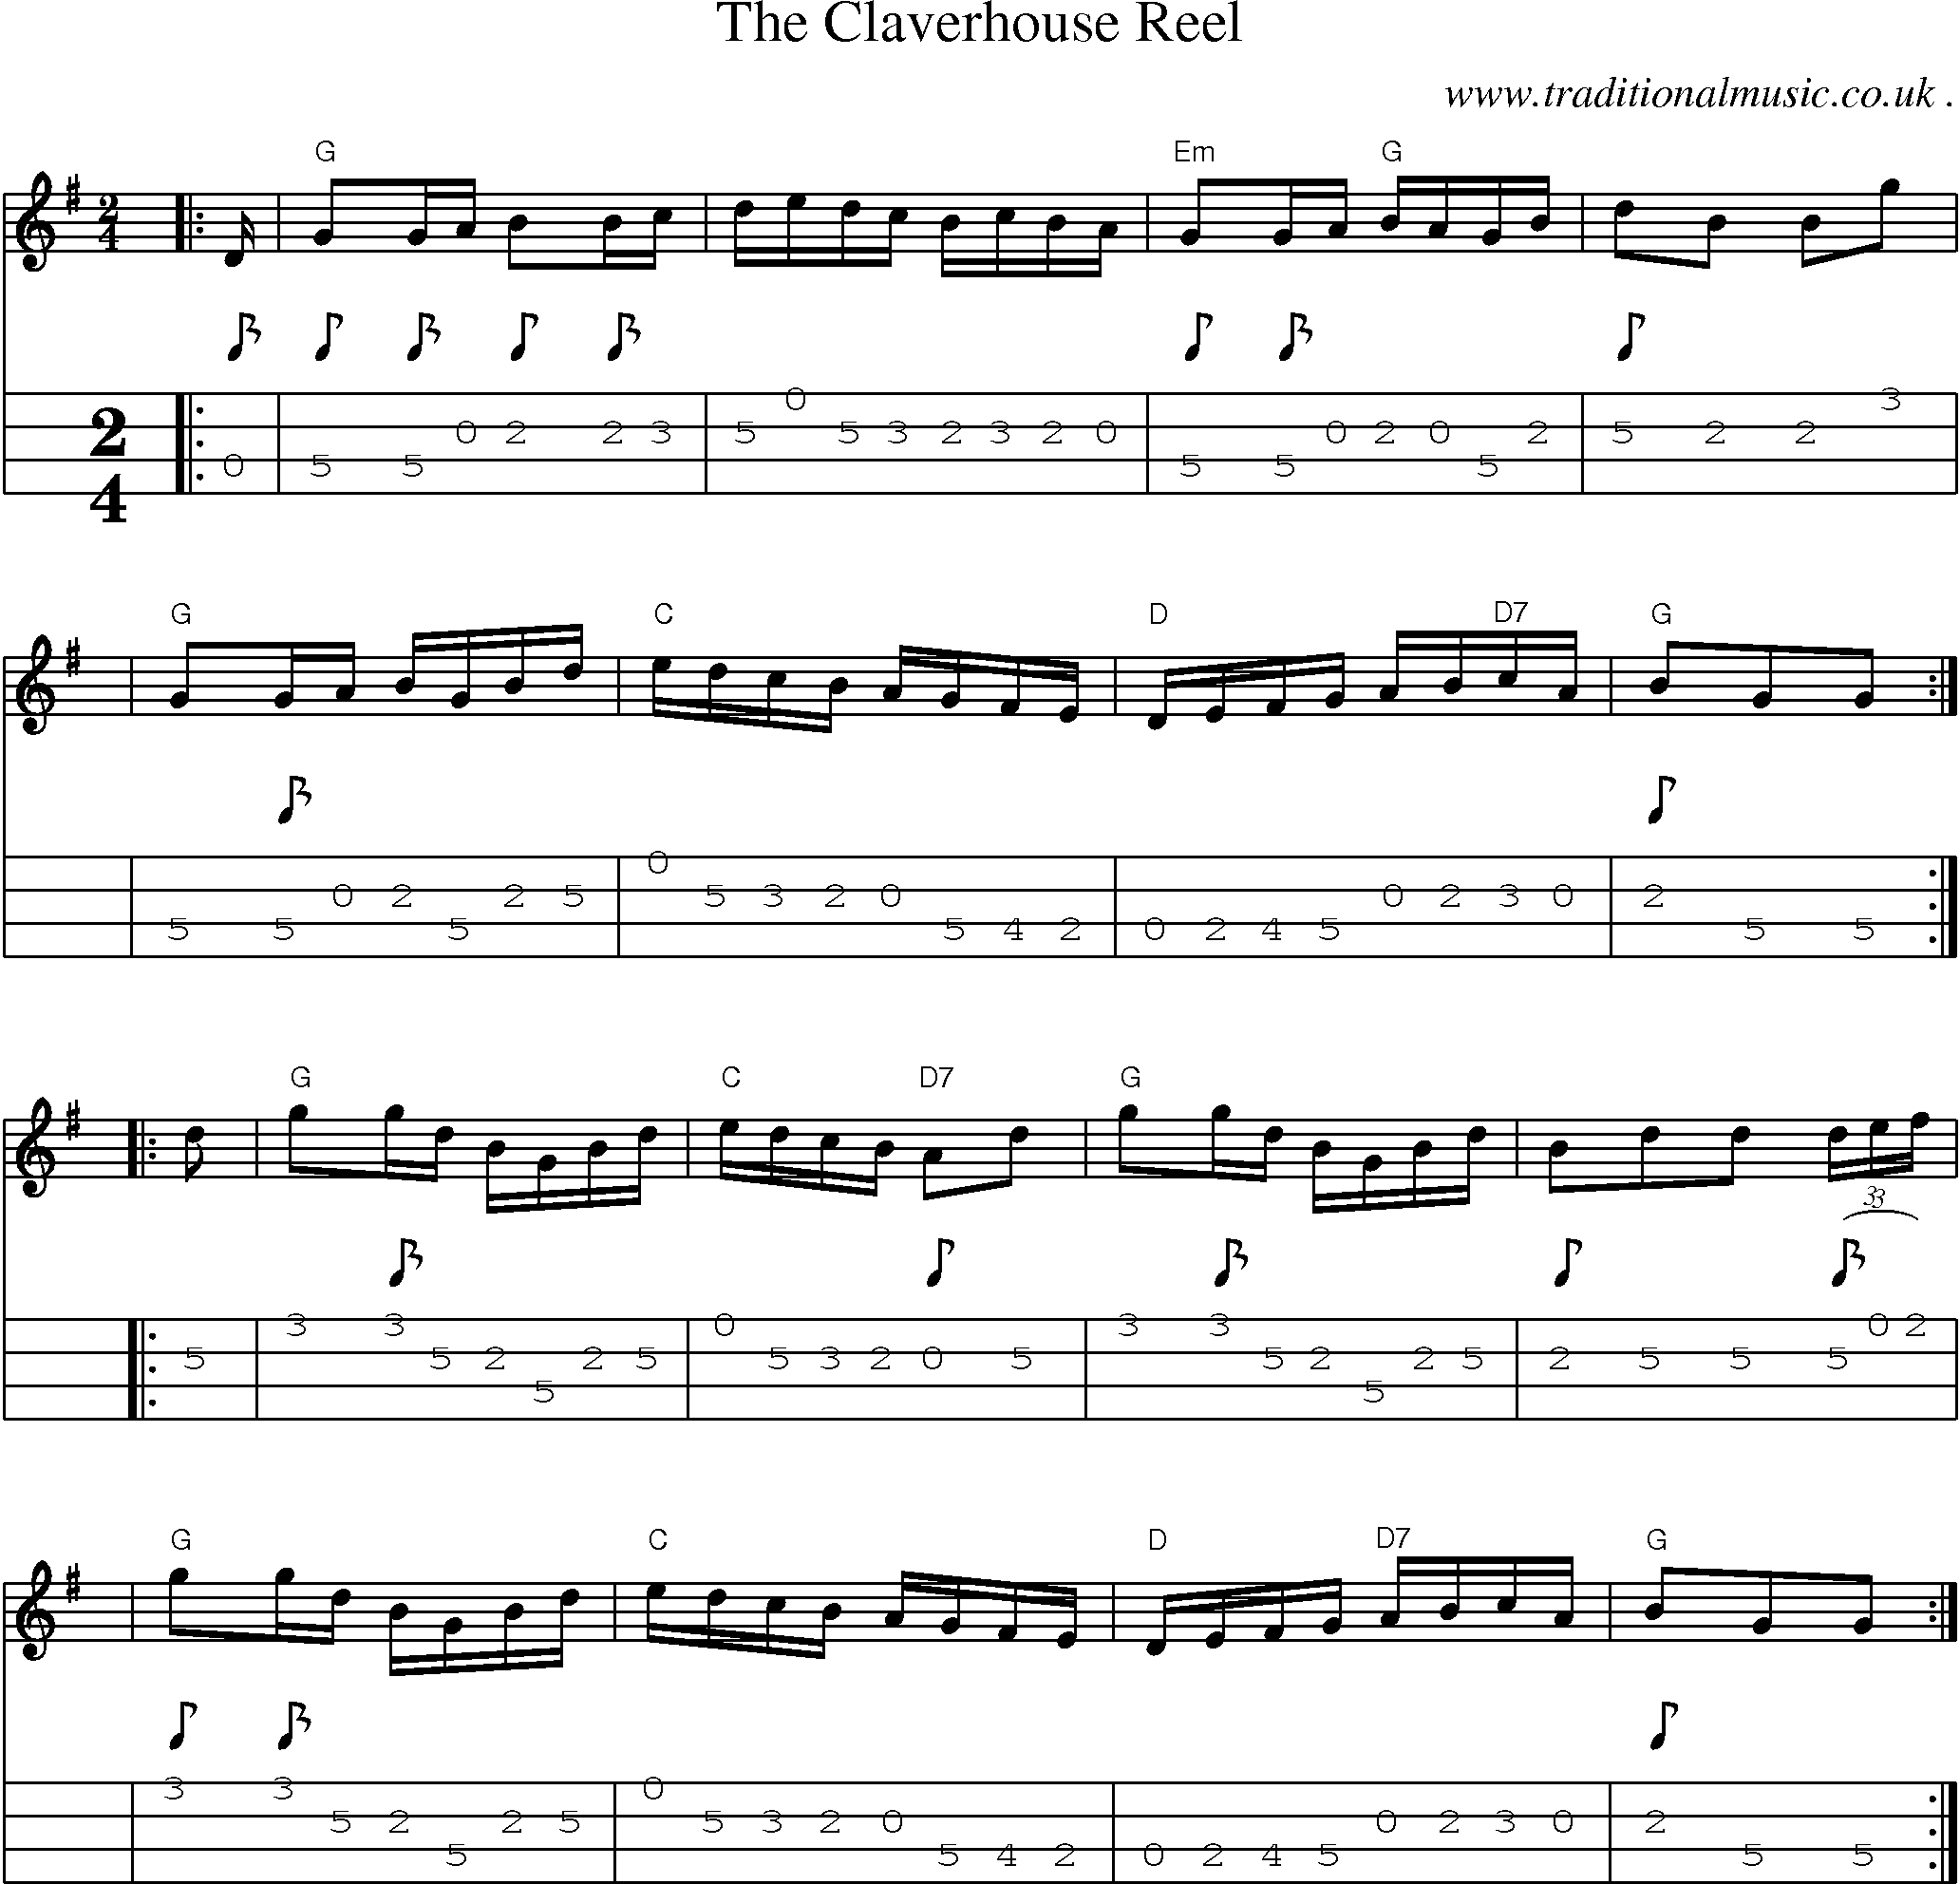 Sheet-music  score, Chords and Mandolin Tabs for The Claverhouse Reel